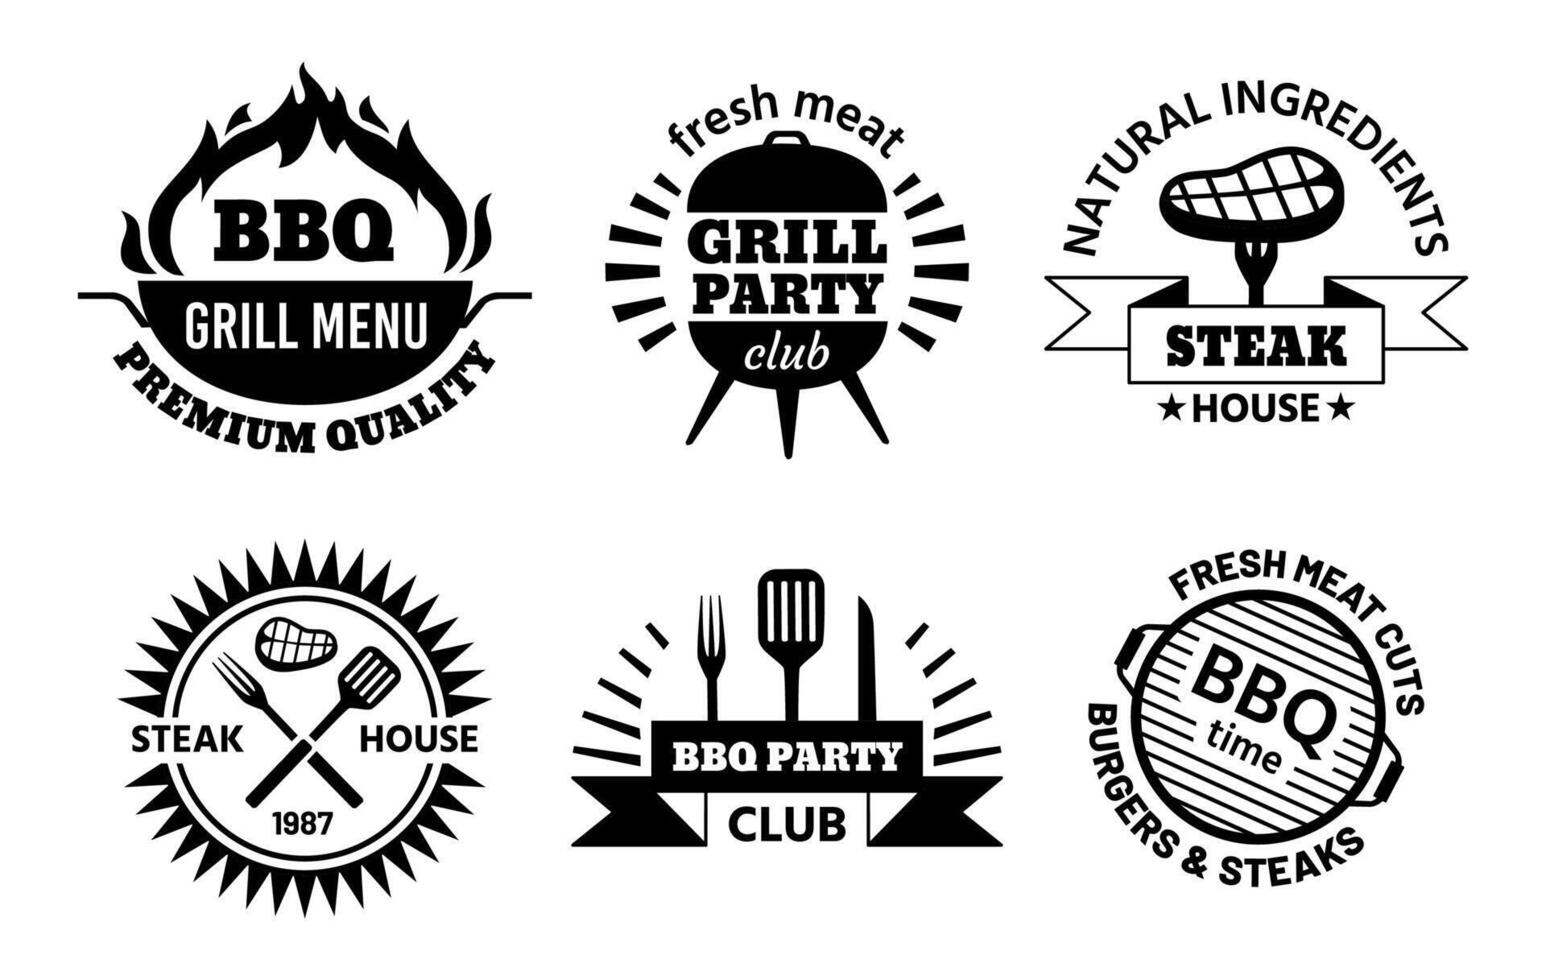 Bbq logo. Barbecue and steak house emblems for restaurant menu. Bbq club labels with hot grill, meat, sausage and cooking tools vector set